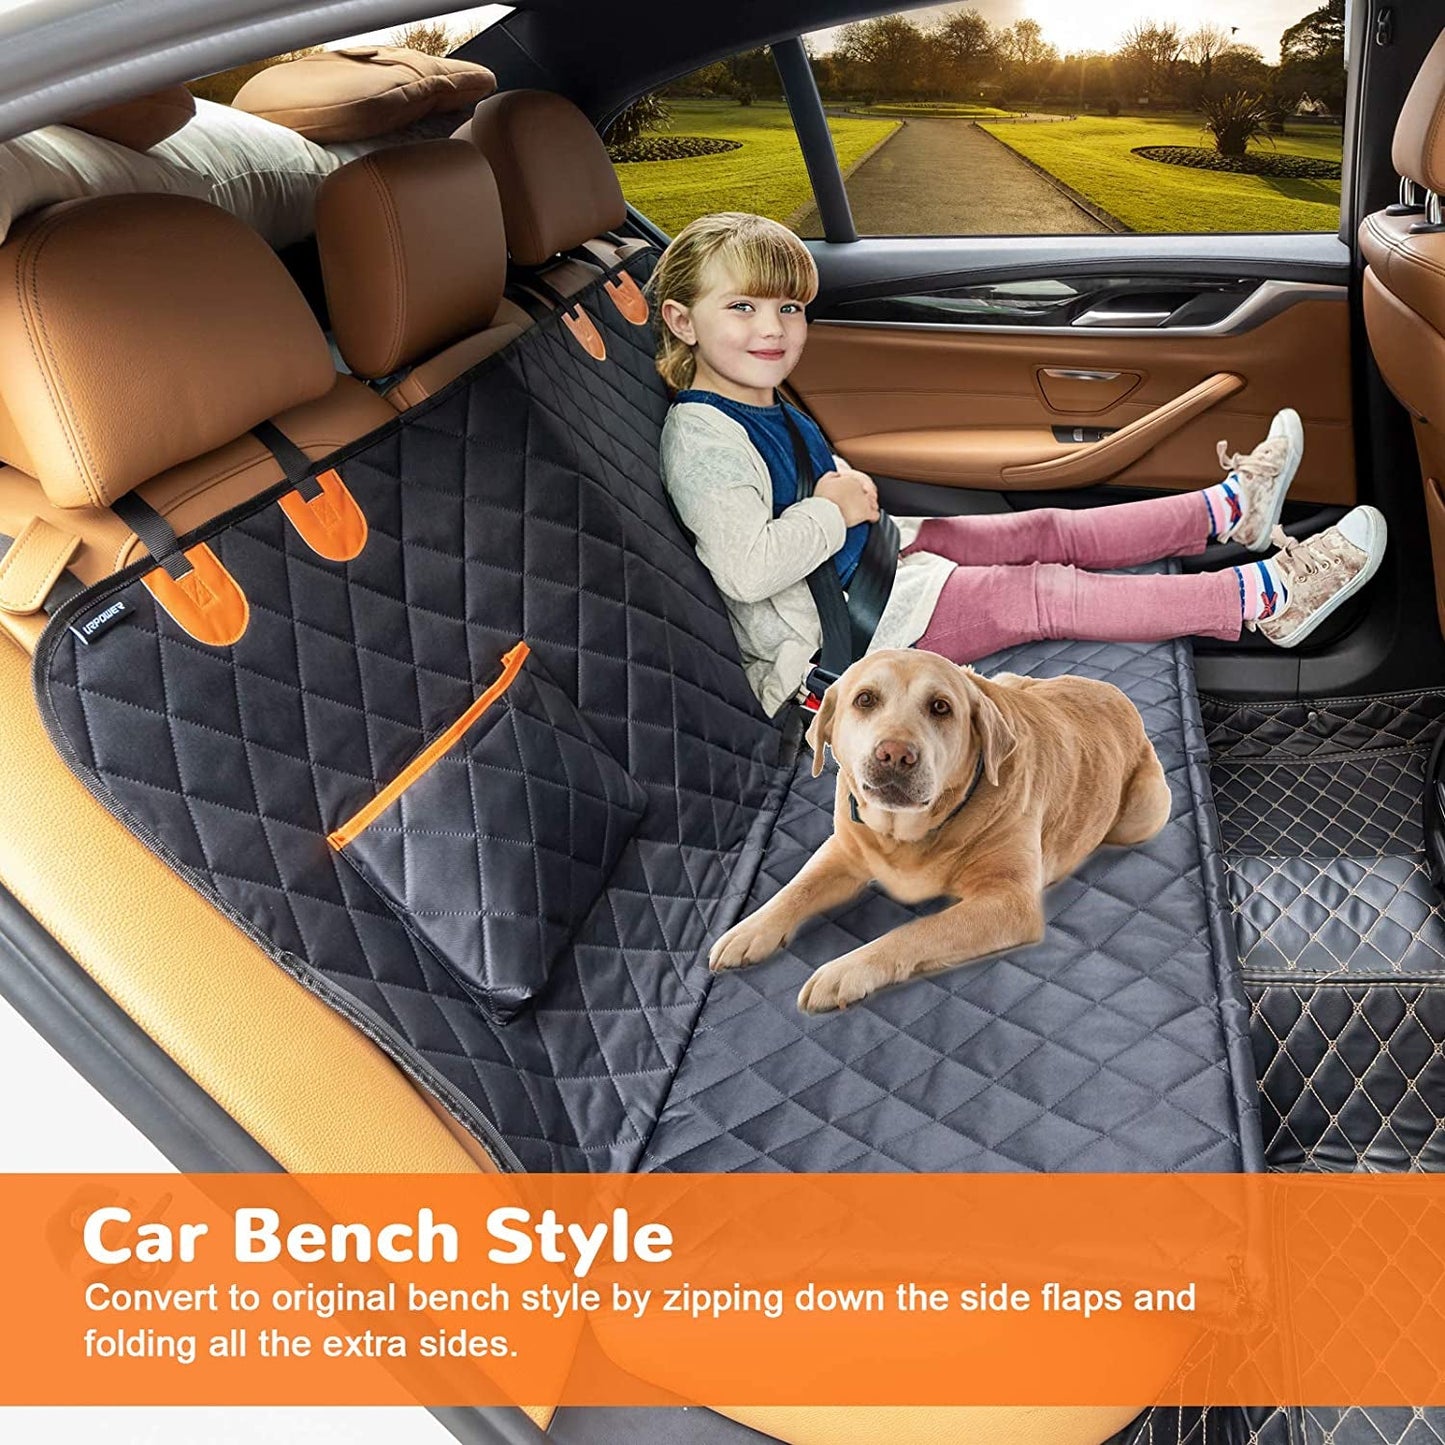 Dog Seat Cover Car Seat Cover for Pets 100%Waterproof Pet Seat Cover Hammock 600D Heavy Duty Scratch Proof Nonslip Durable Soft Pet Back Seat Covers for Cars Trucks and Suvs - PETGS